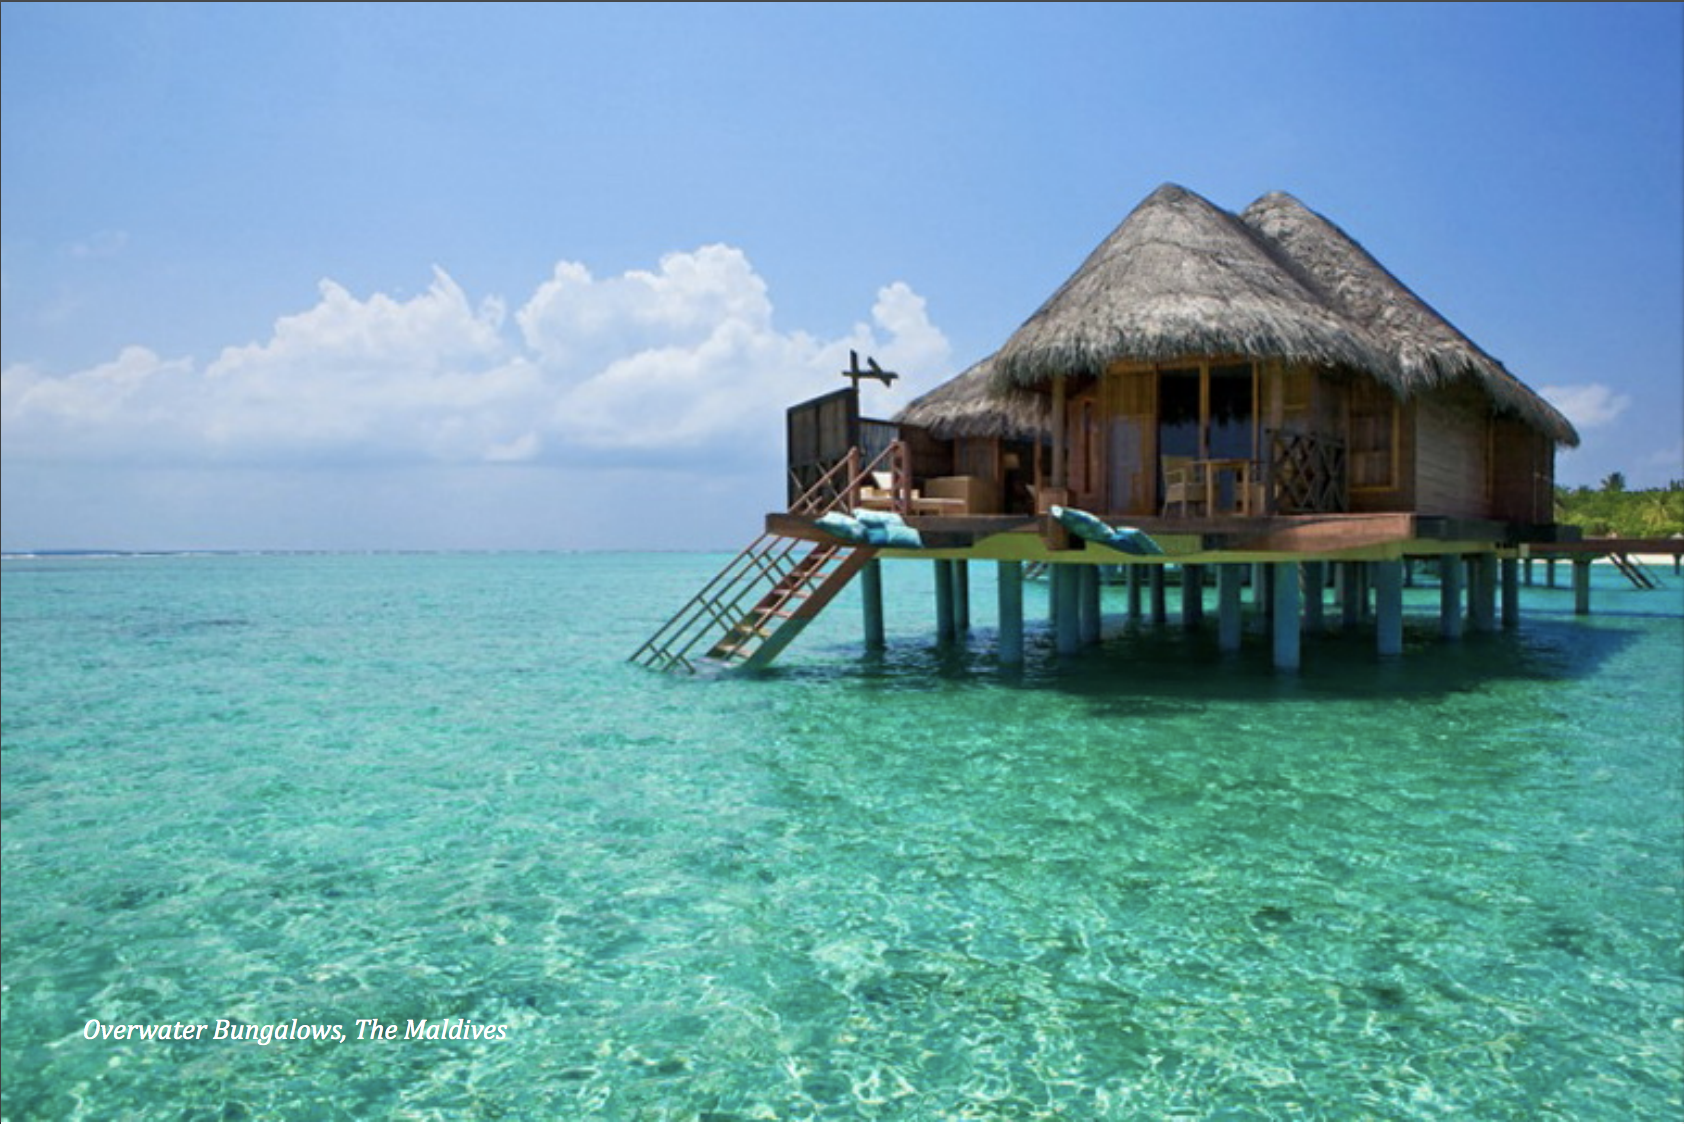  Stay in beautiful overwater bungalows and scuba dive through rich history in the Maldives   Swim with neon fish, turtles, dolphins, and even sharks, if you dare…   Adventure on extreme water sports such as parasailing, wakeboarding, and kayaking   R